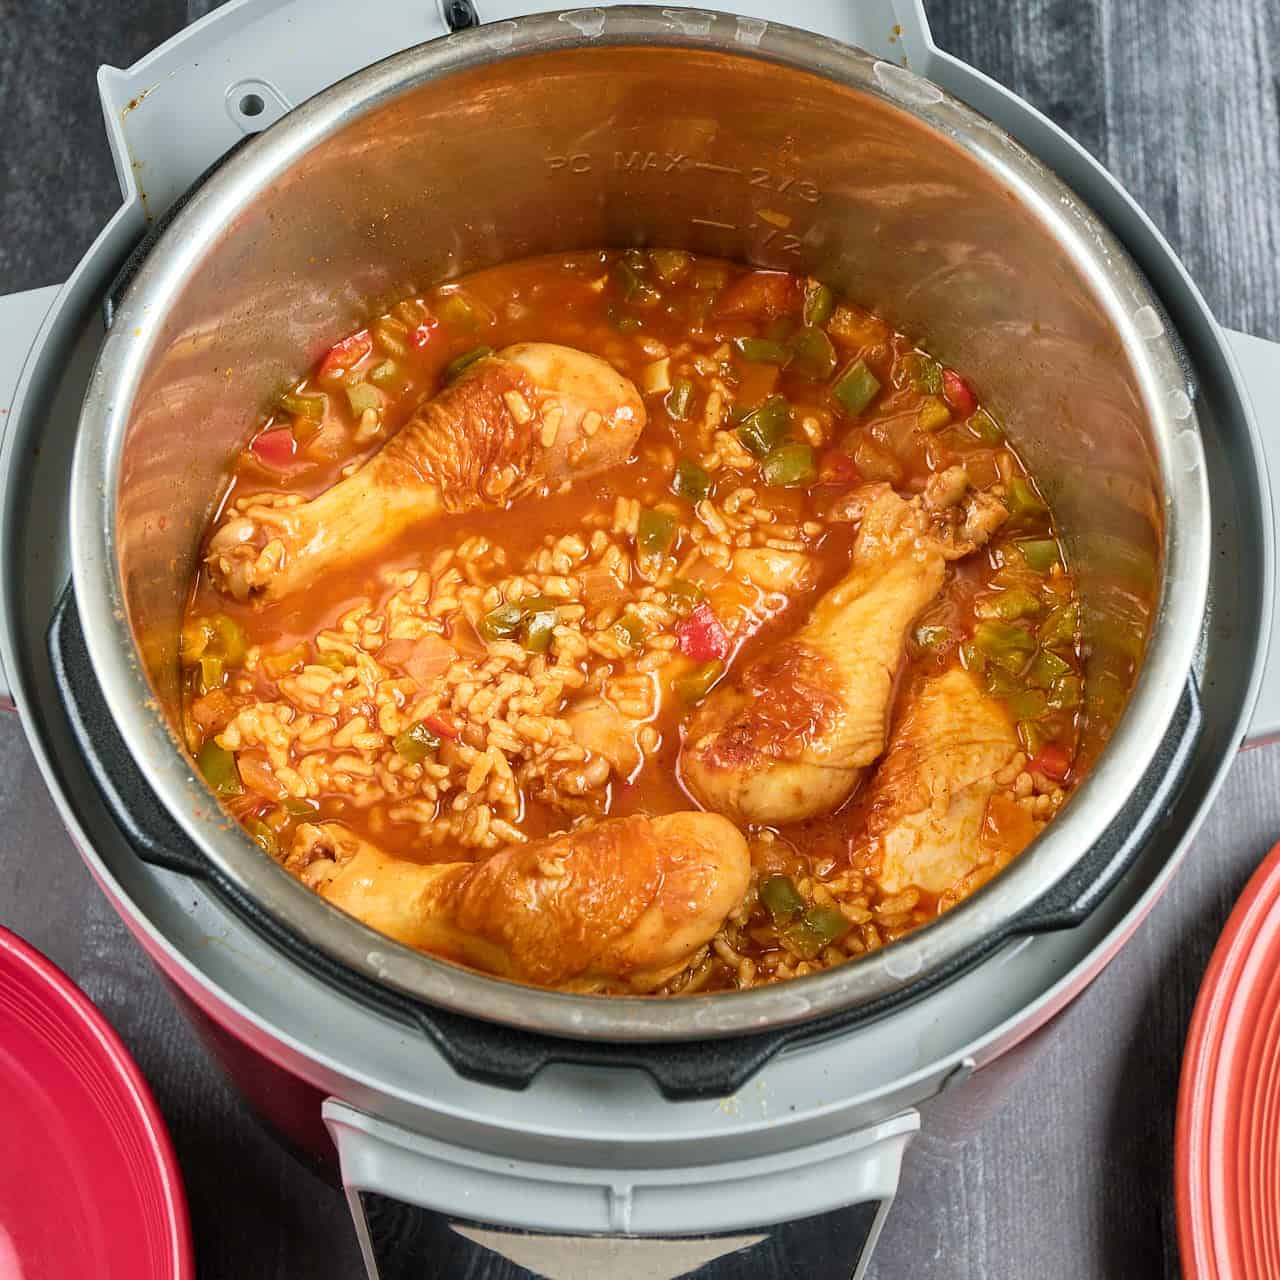 An Instant Pot full of cooked chicken legs and rice